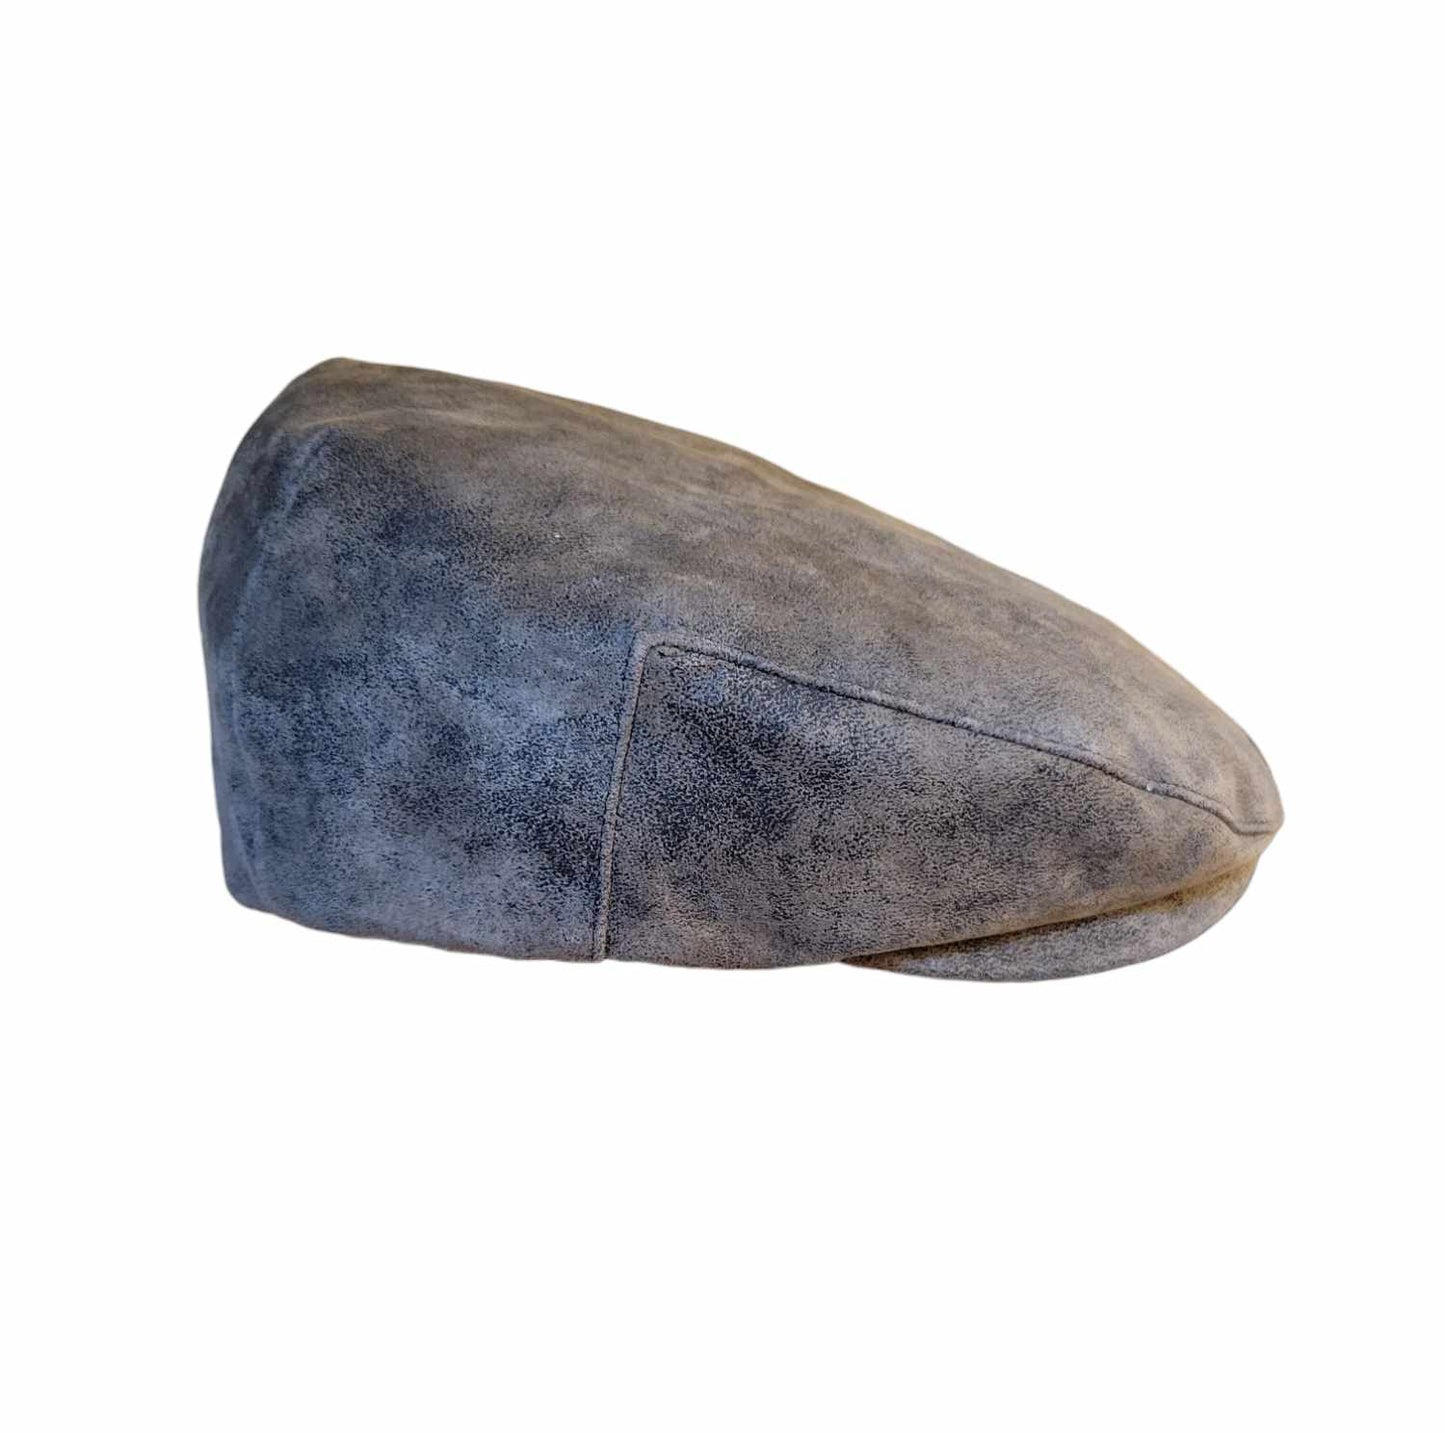 Stetson Distressed Leather Ivy Cap